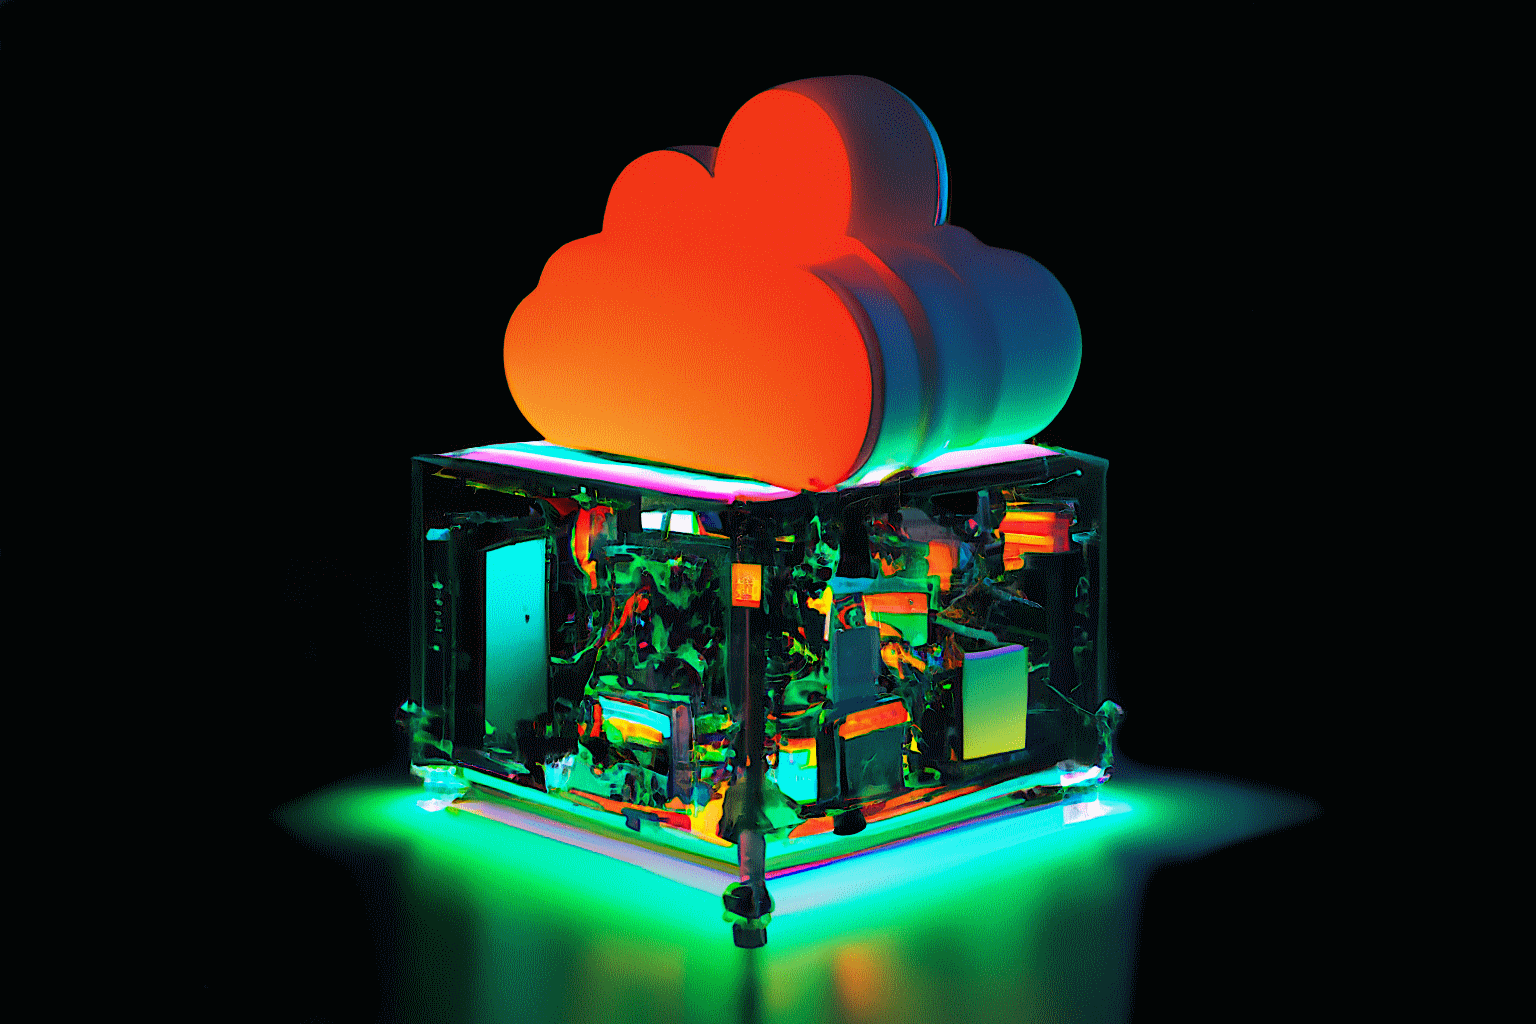 An abstract picture of a server underneath a brightly lit cloud